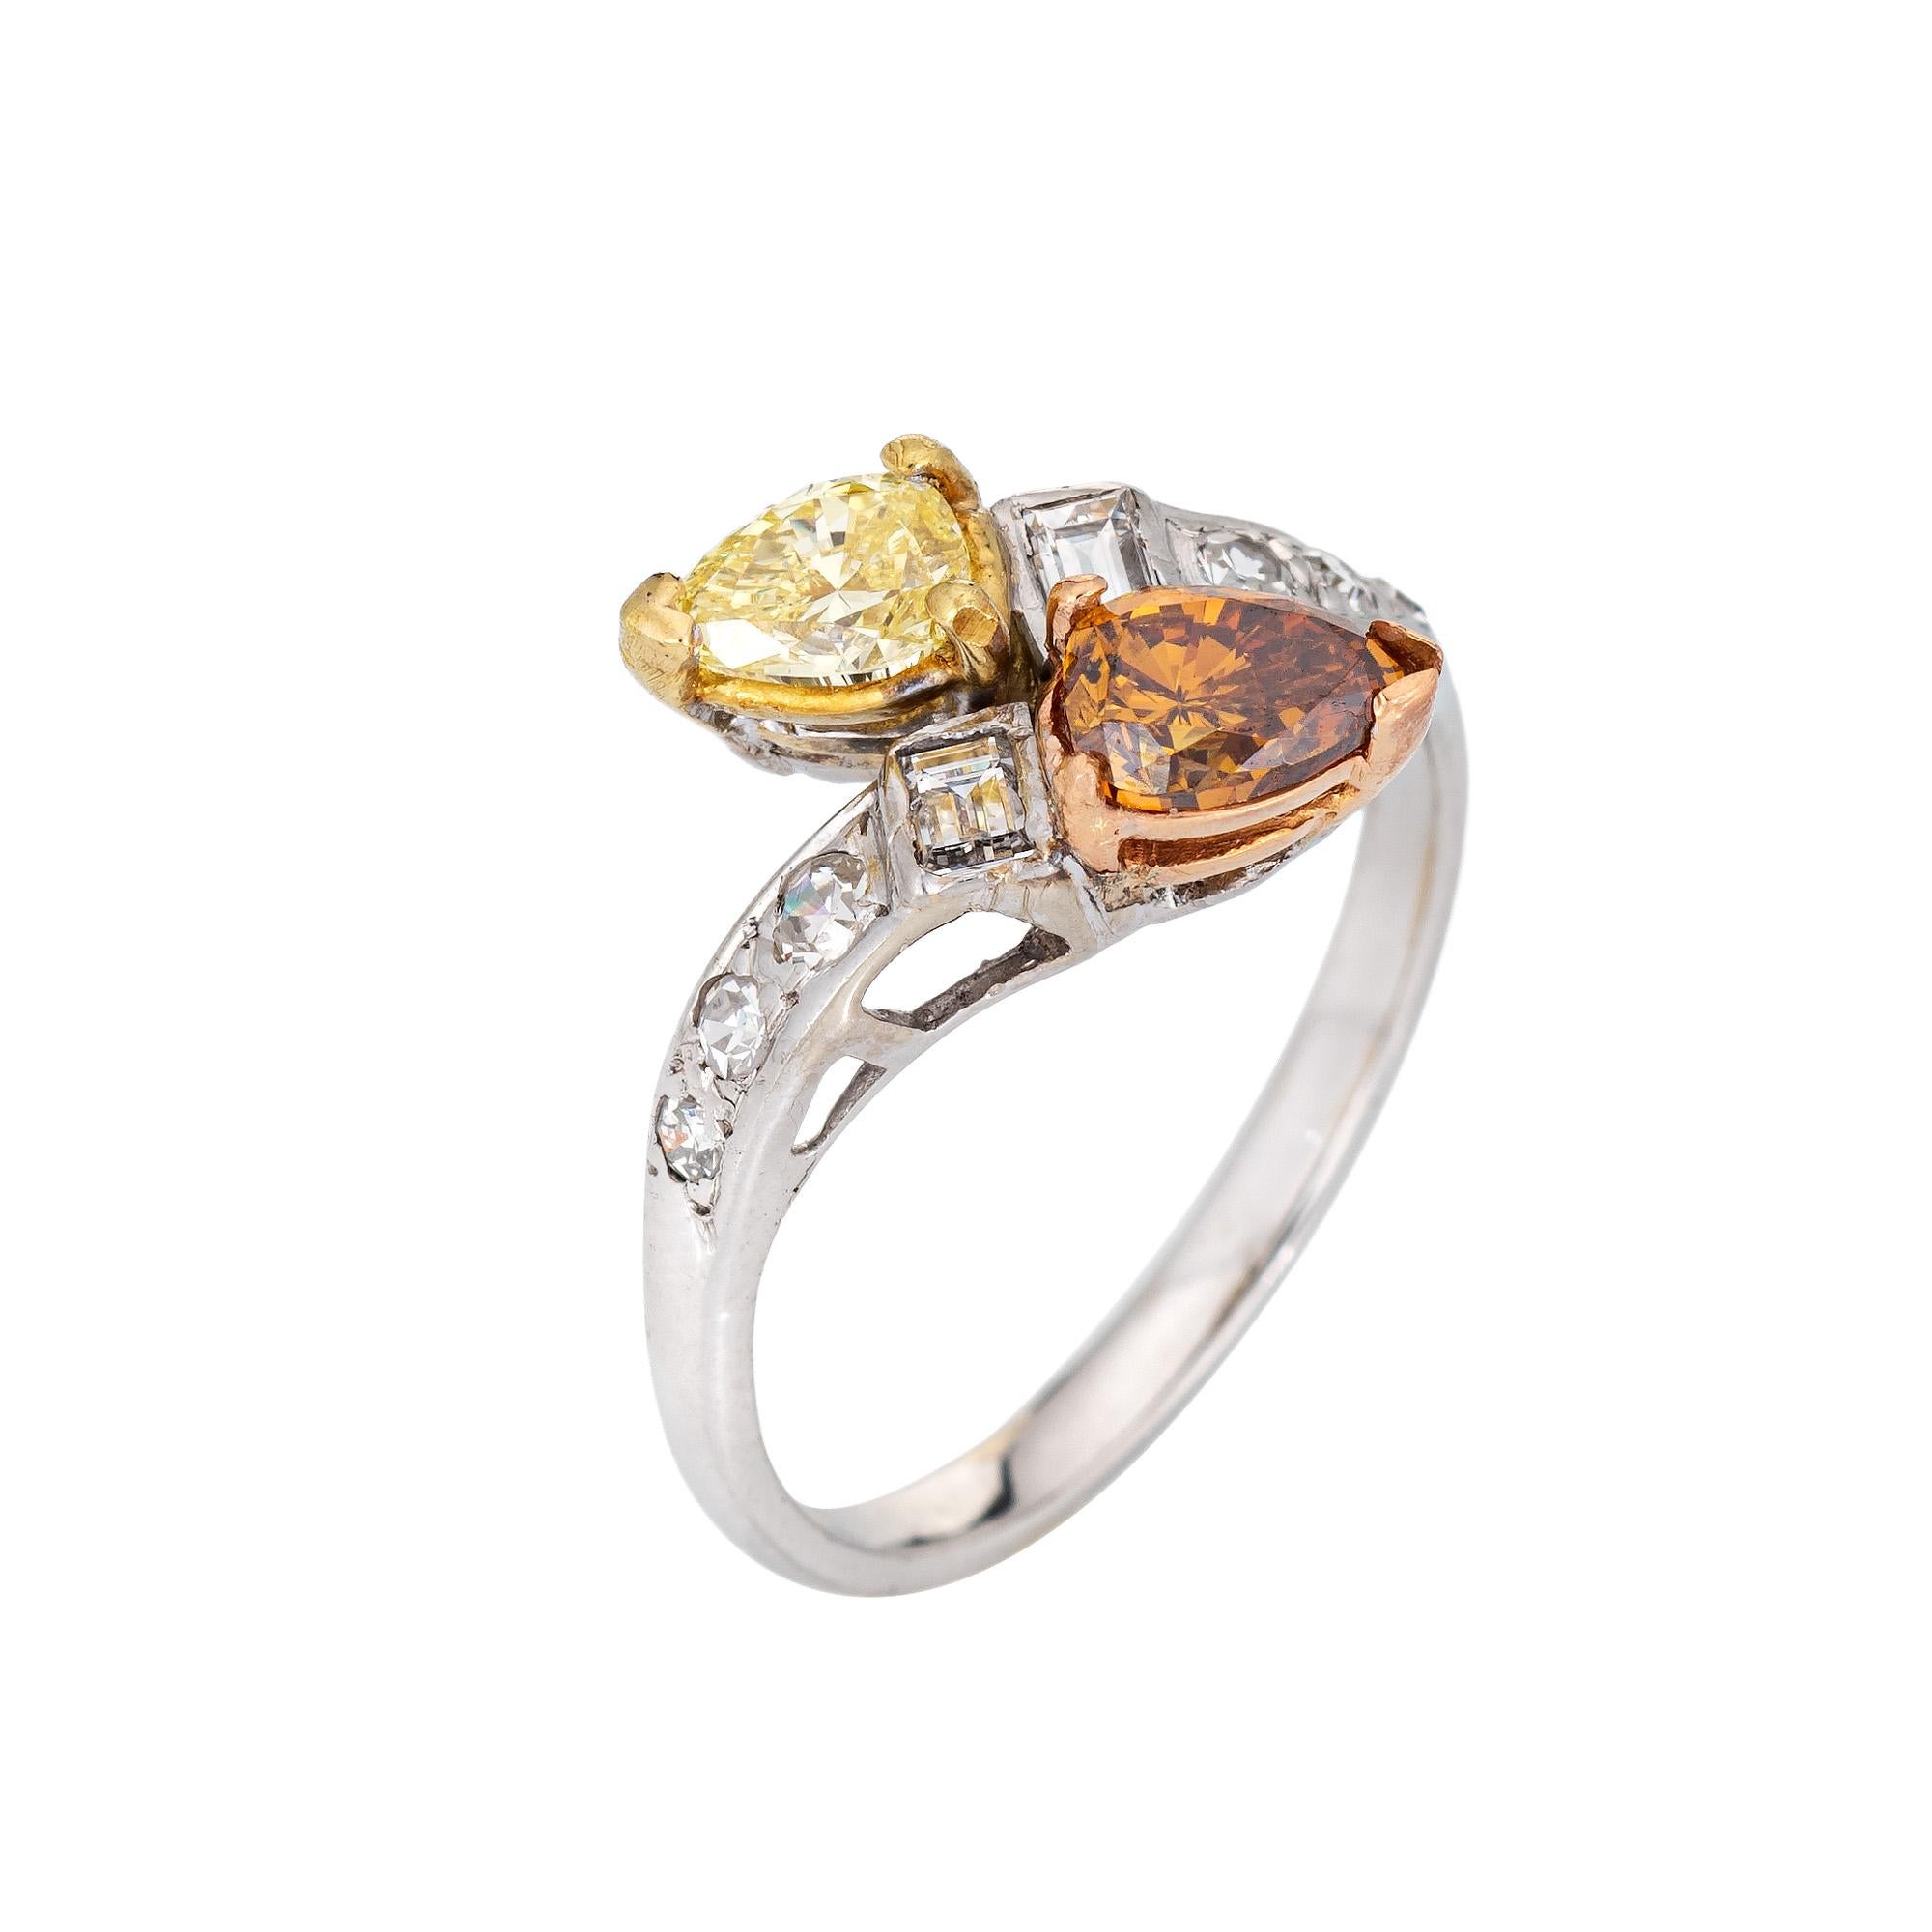 Stylish vintage colored diamond 'moi et toi' ring crafted in 14k white gold. 

One pear cut yellow diamond is estimated at 0.38 carats (estimated at SI2 clarity) and one pear cut brown/orange diamond estimated at 0.60 carats (estimated at SI2